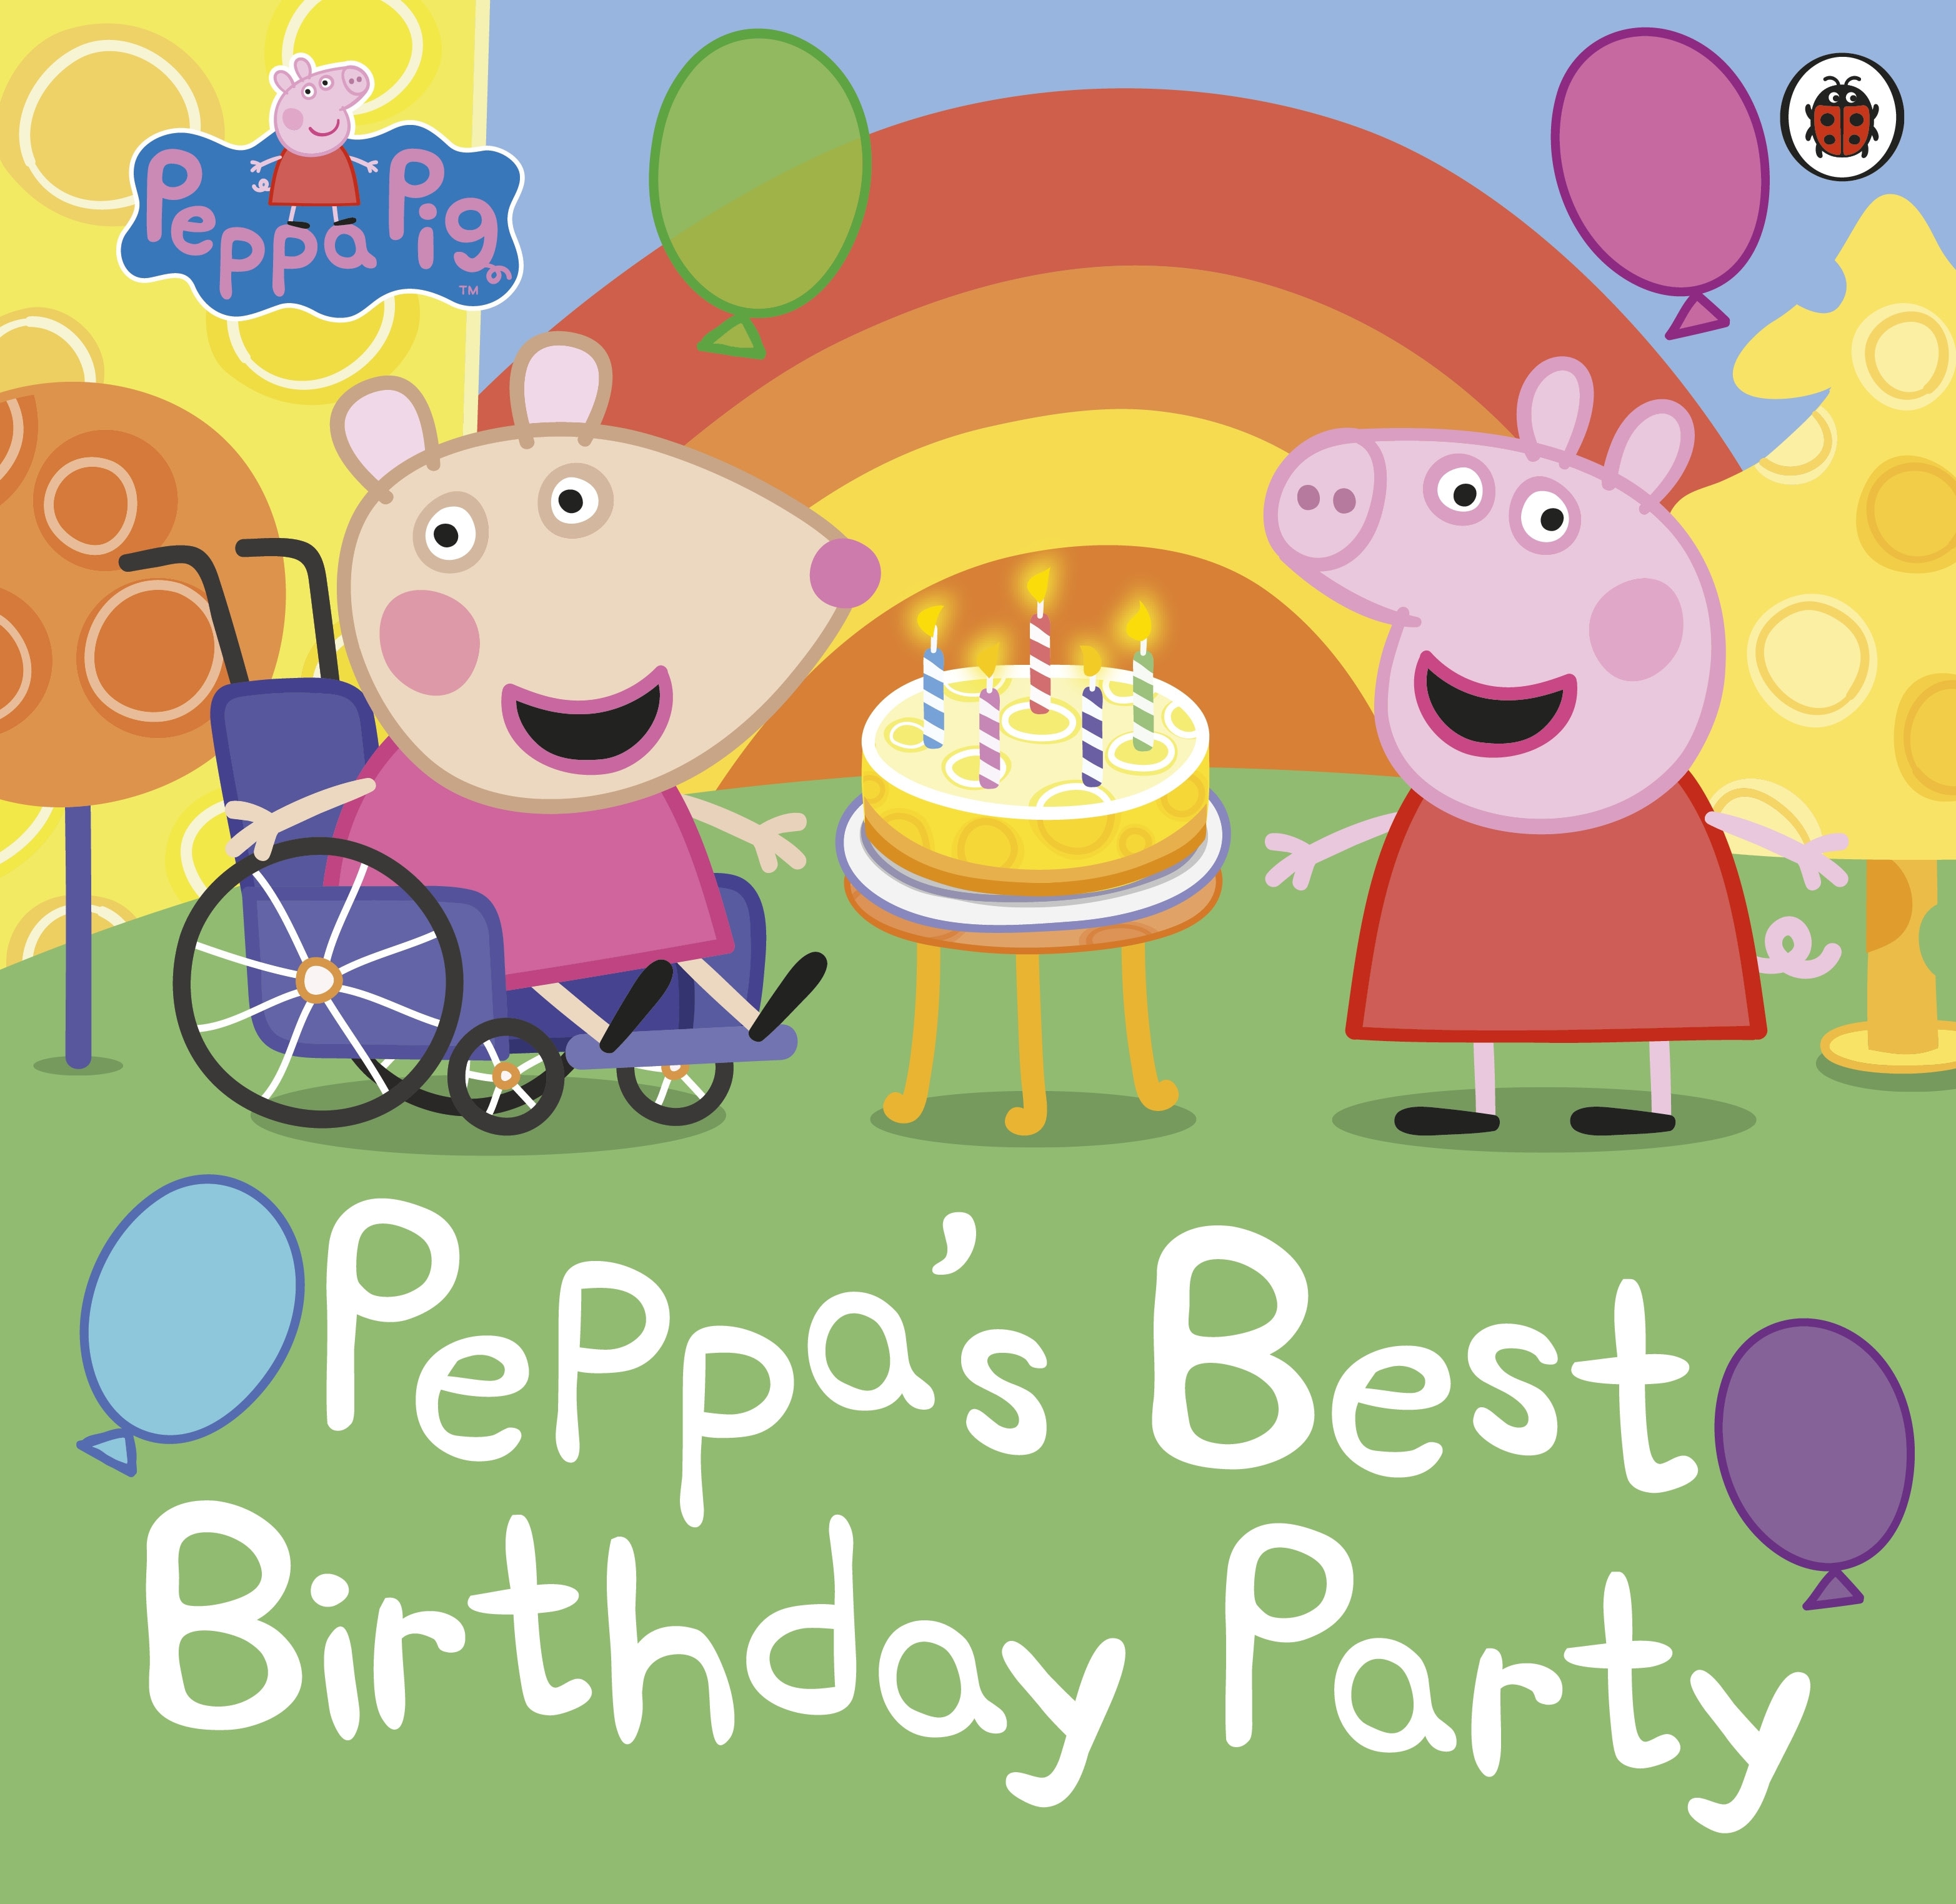 Book “Peppa Pig: Peppa's Best Birthday Party” by Peppa Pig — March 4, 2021